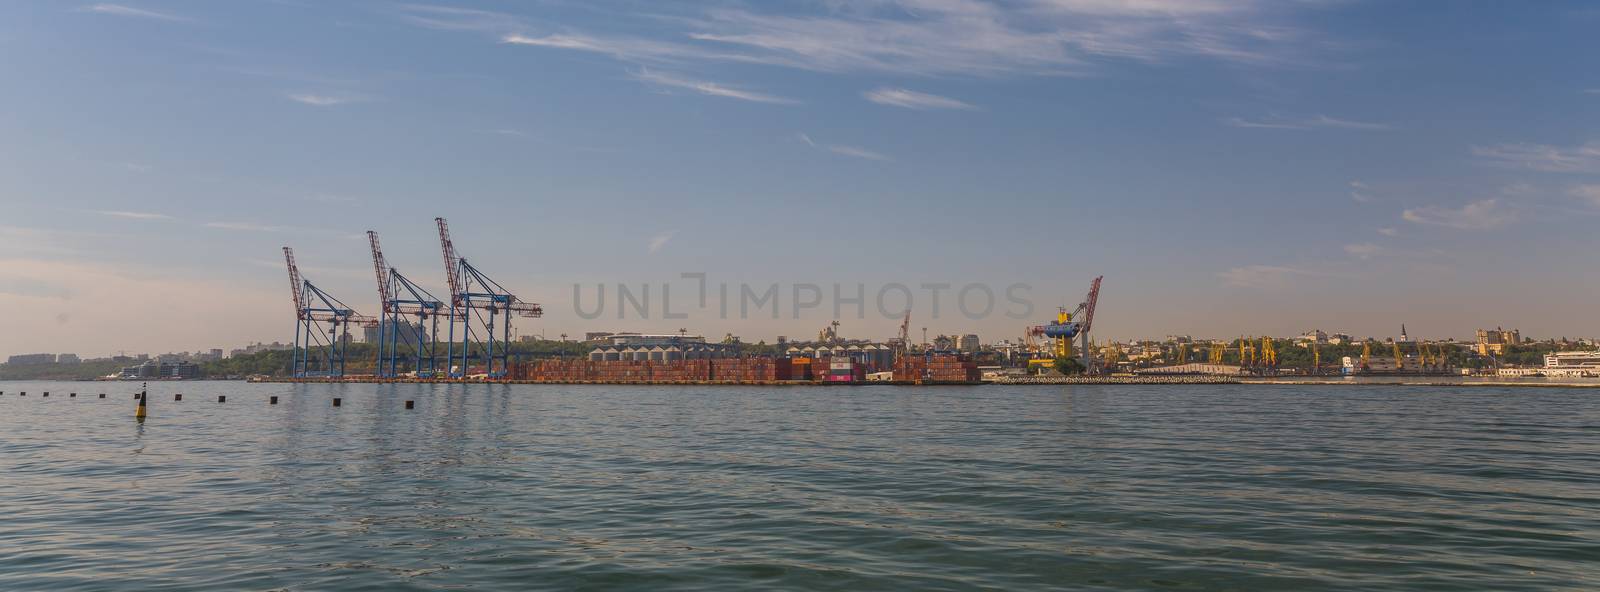 Odessa, Ukraine - 08.28.2018. Panoramic view from the sea of cargo port and container terminal in Odessa, Ukraine